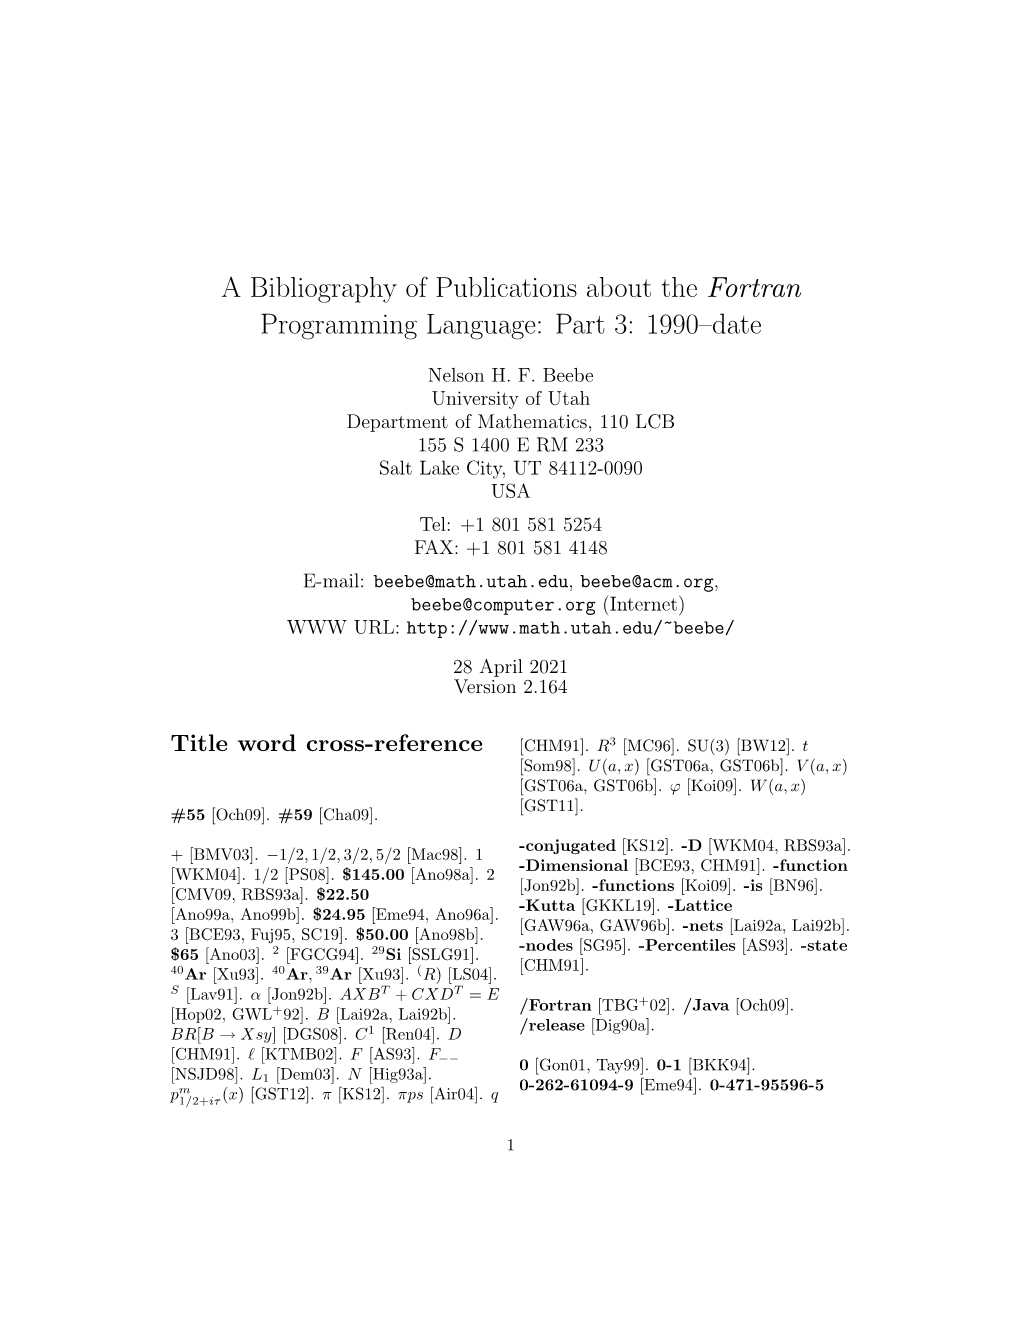 A Bibliography of Publications About the Fortran Programming Language: Part 3: 1990–Date